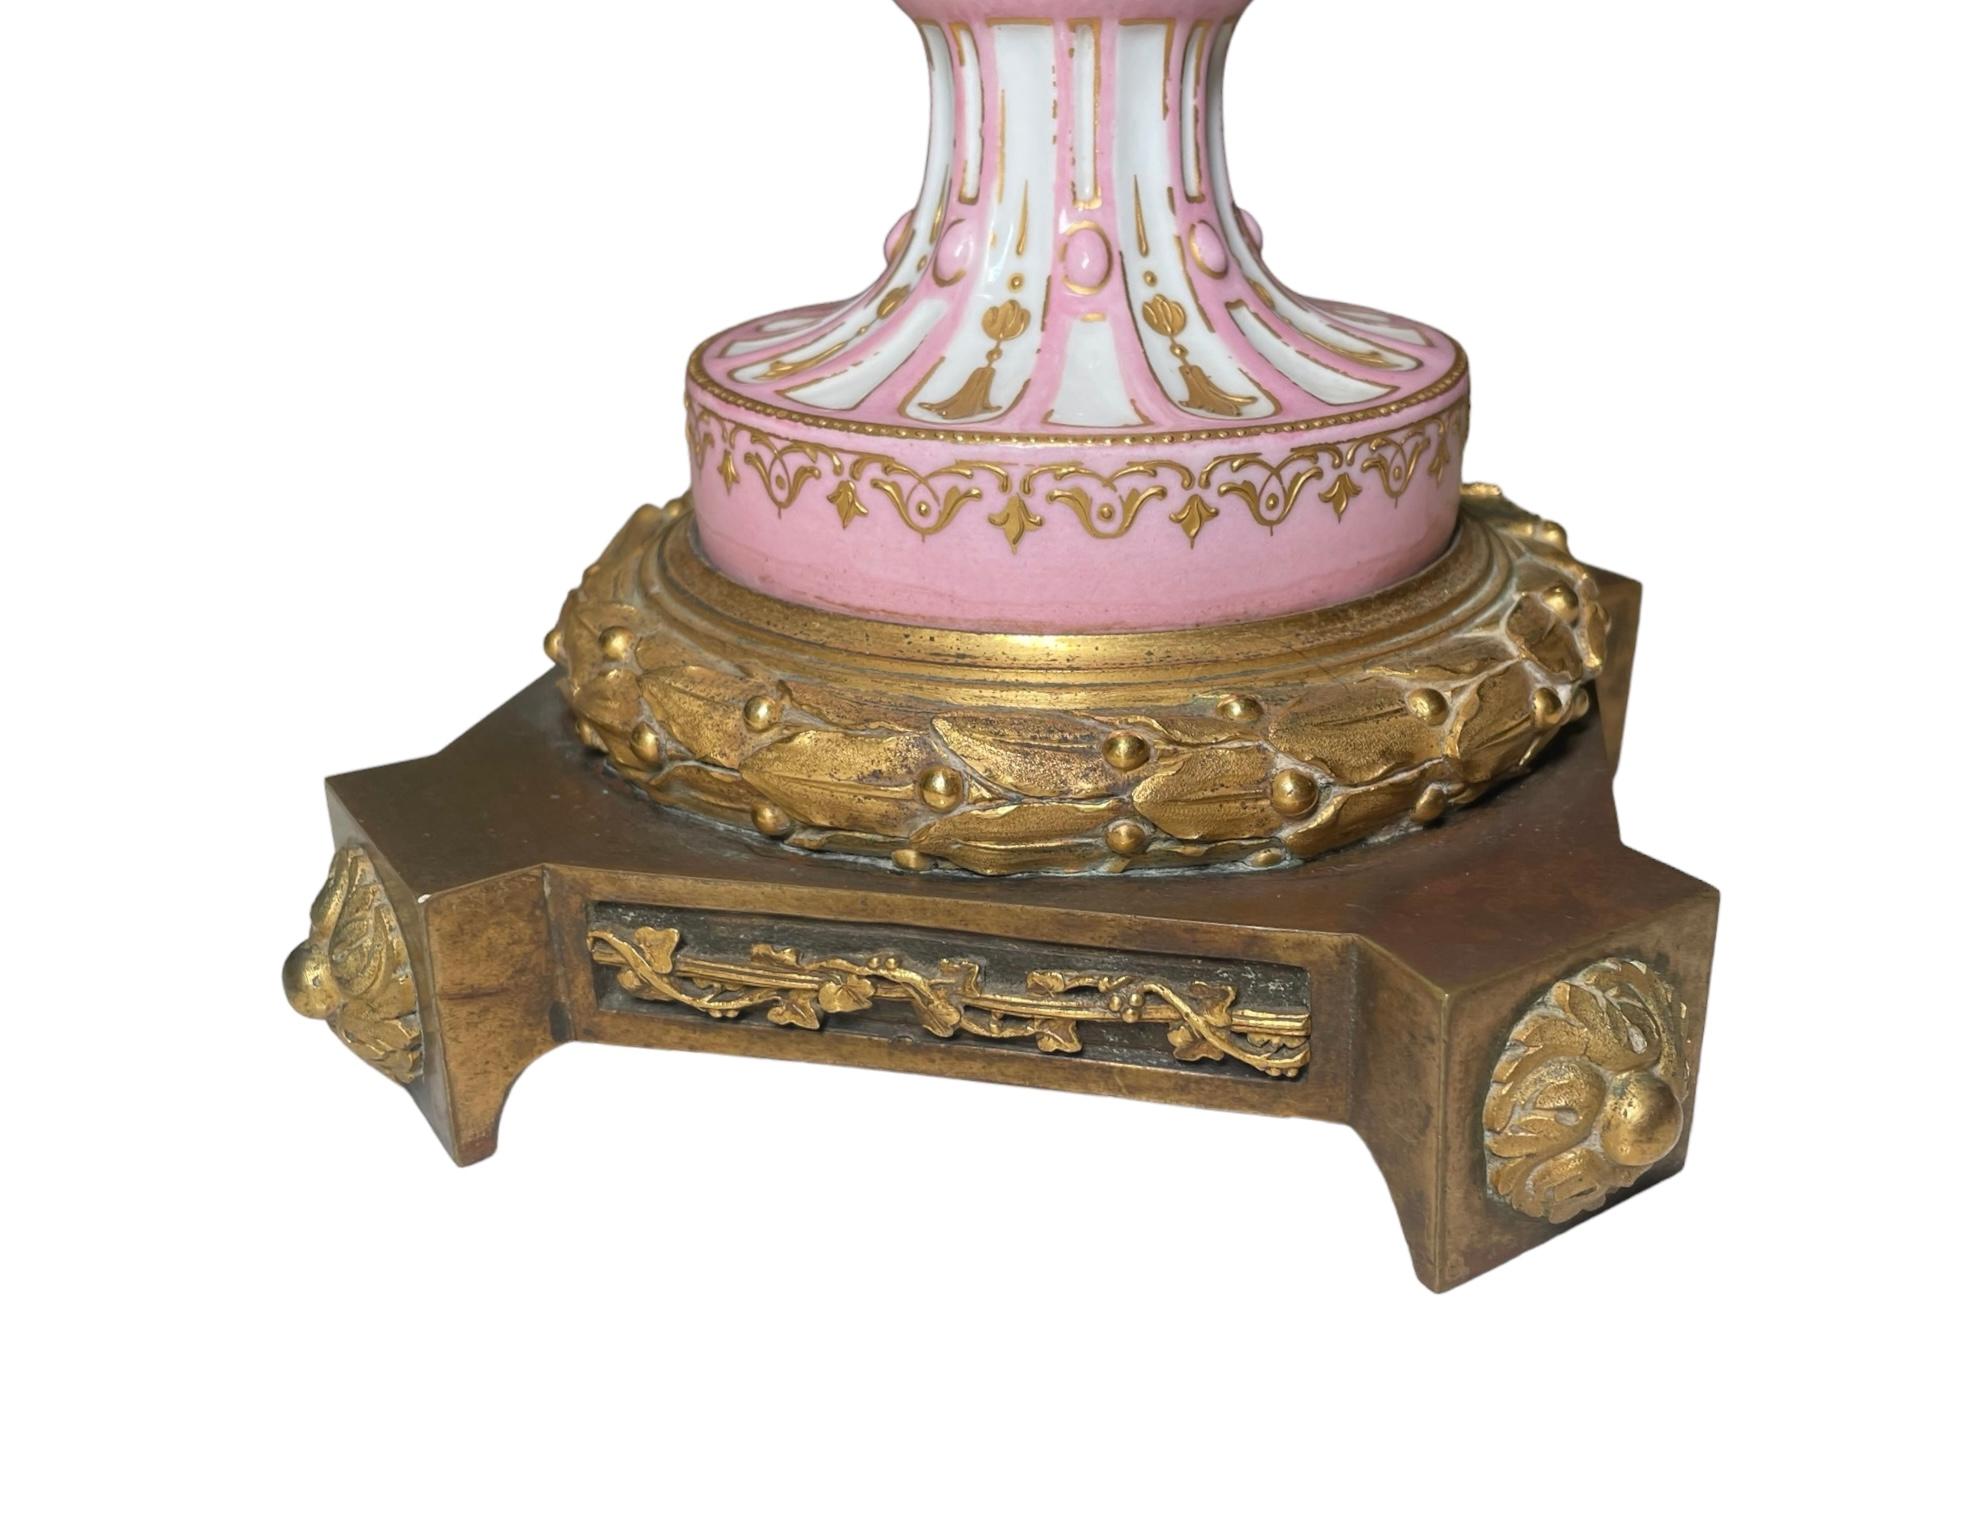 19th Century M. Demonceaux Sevres Style Porcelain Bronze Mounted Urn Table Lamp For Sale